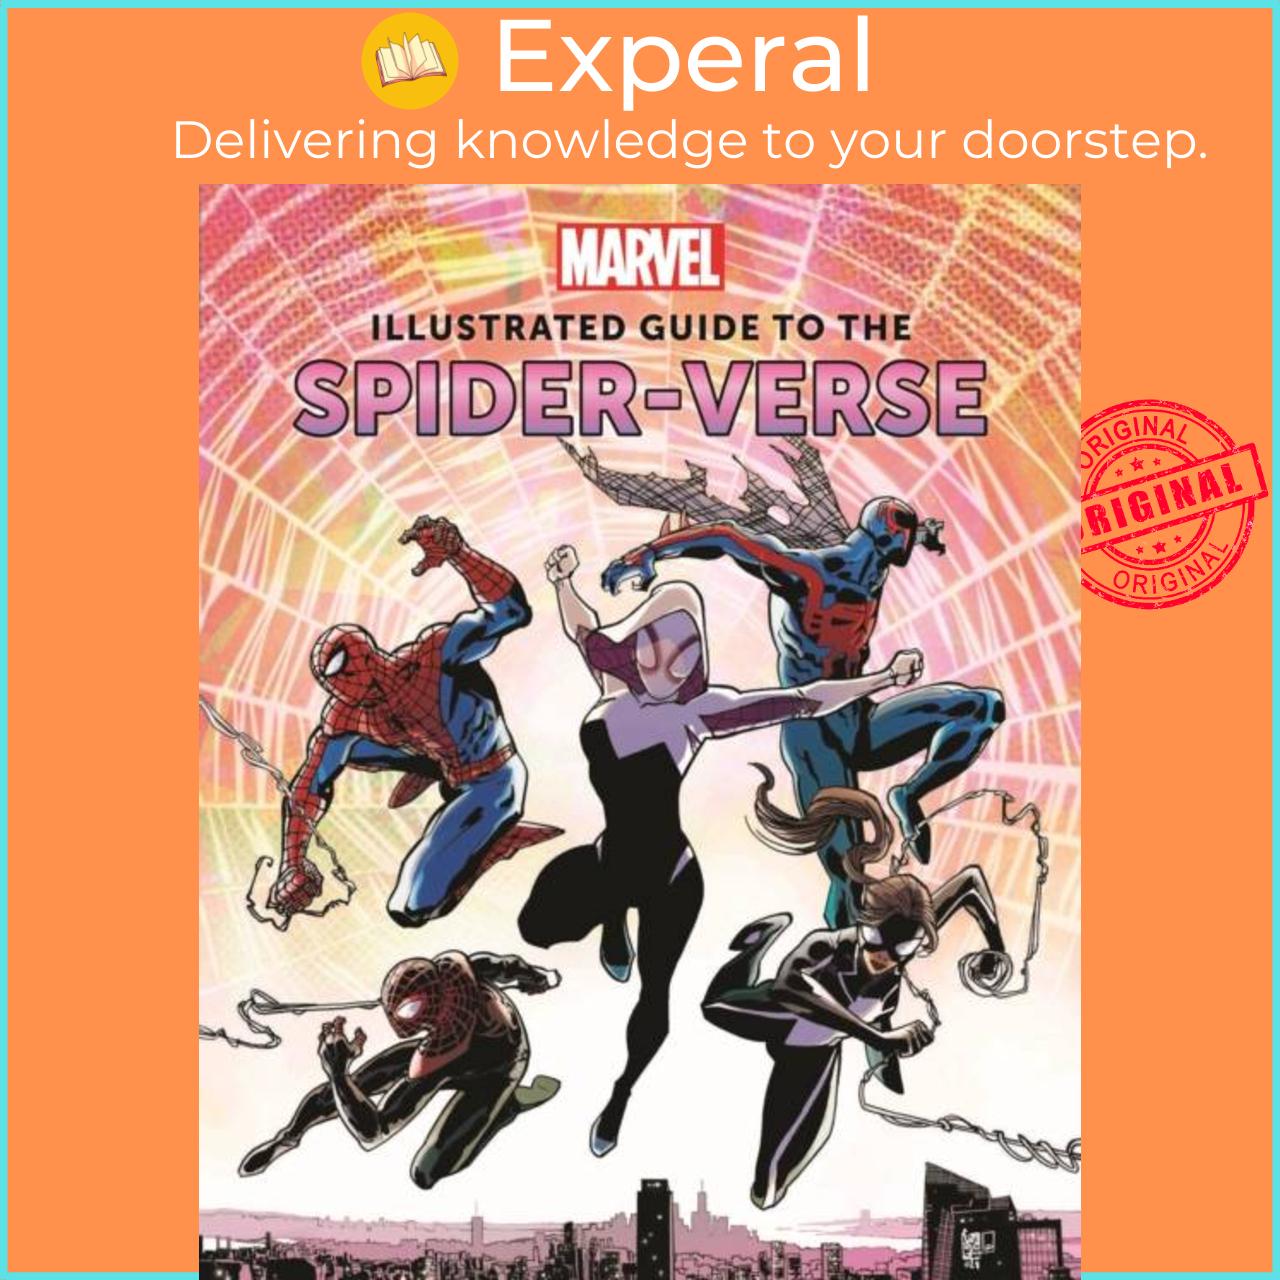 Sách - Marvel: Illustrated Guide to the Spider-Verse by Marc Sumerak (UK edition, hardcover)